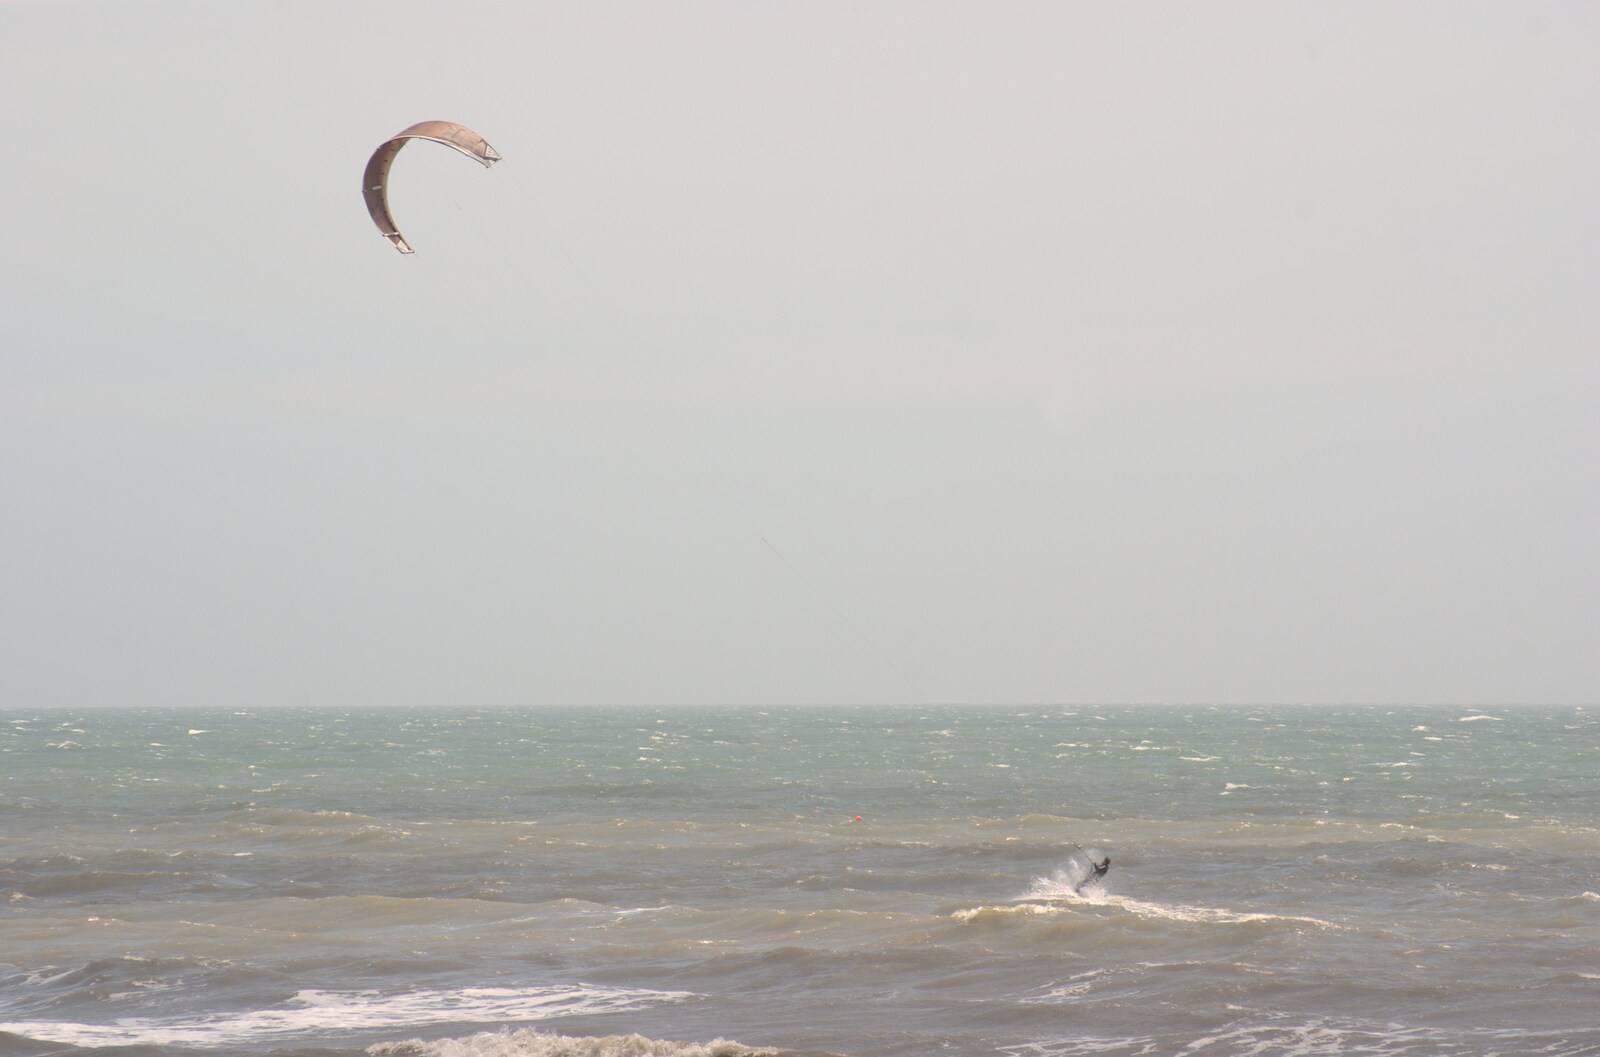 A kite surfer roars around from A Camper Van Odyssey: Charmouth, Plymouth, Dartmoor and Bath - 20th June 2011